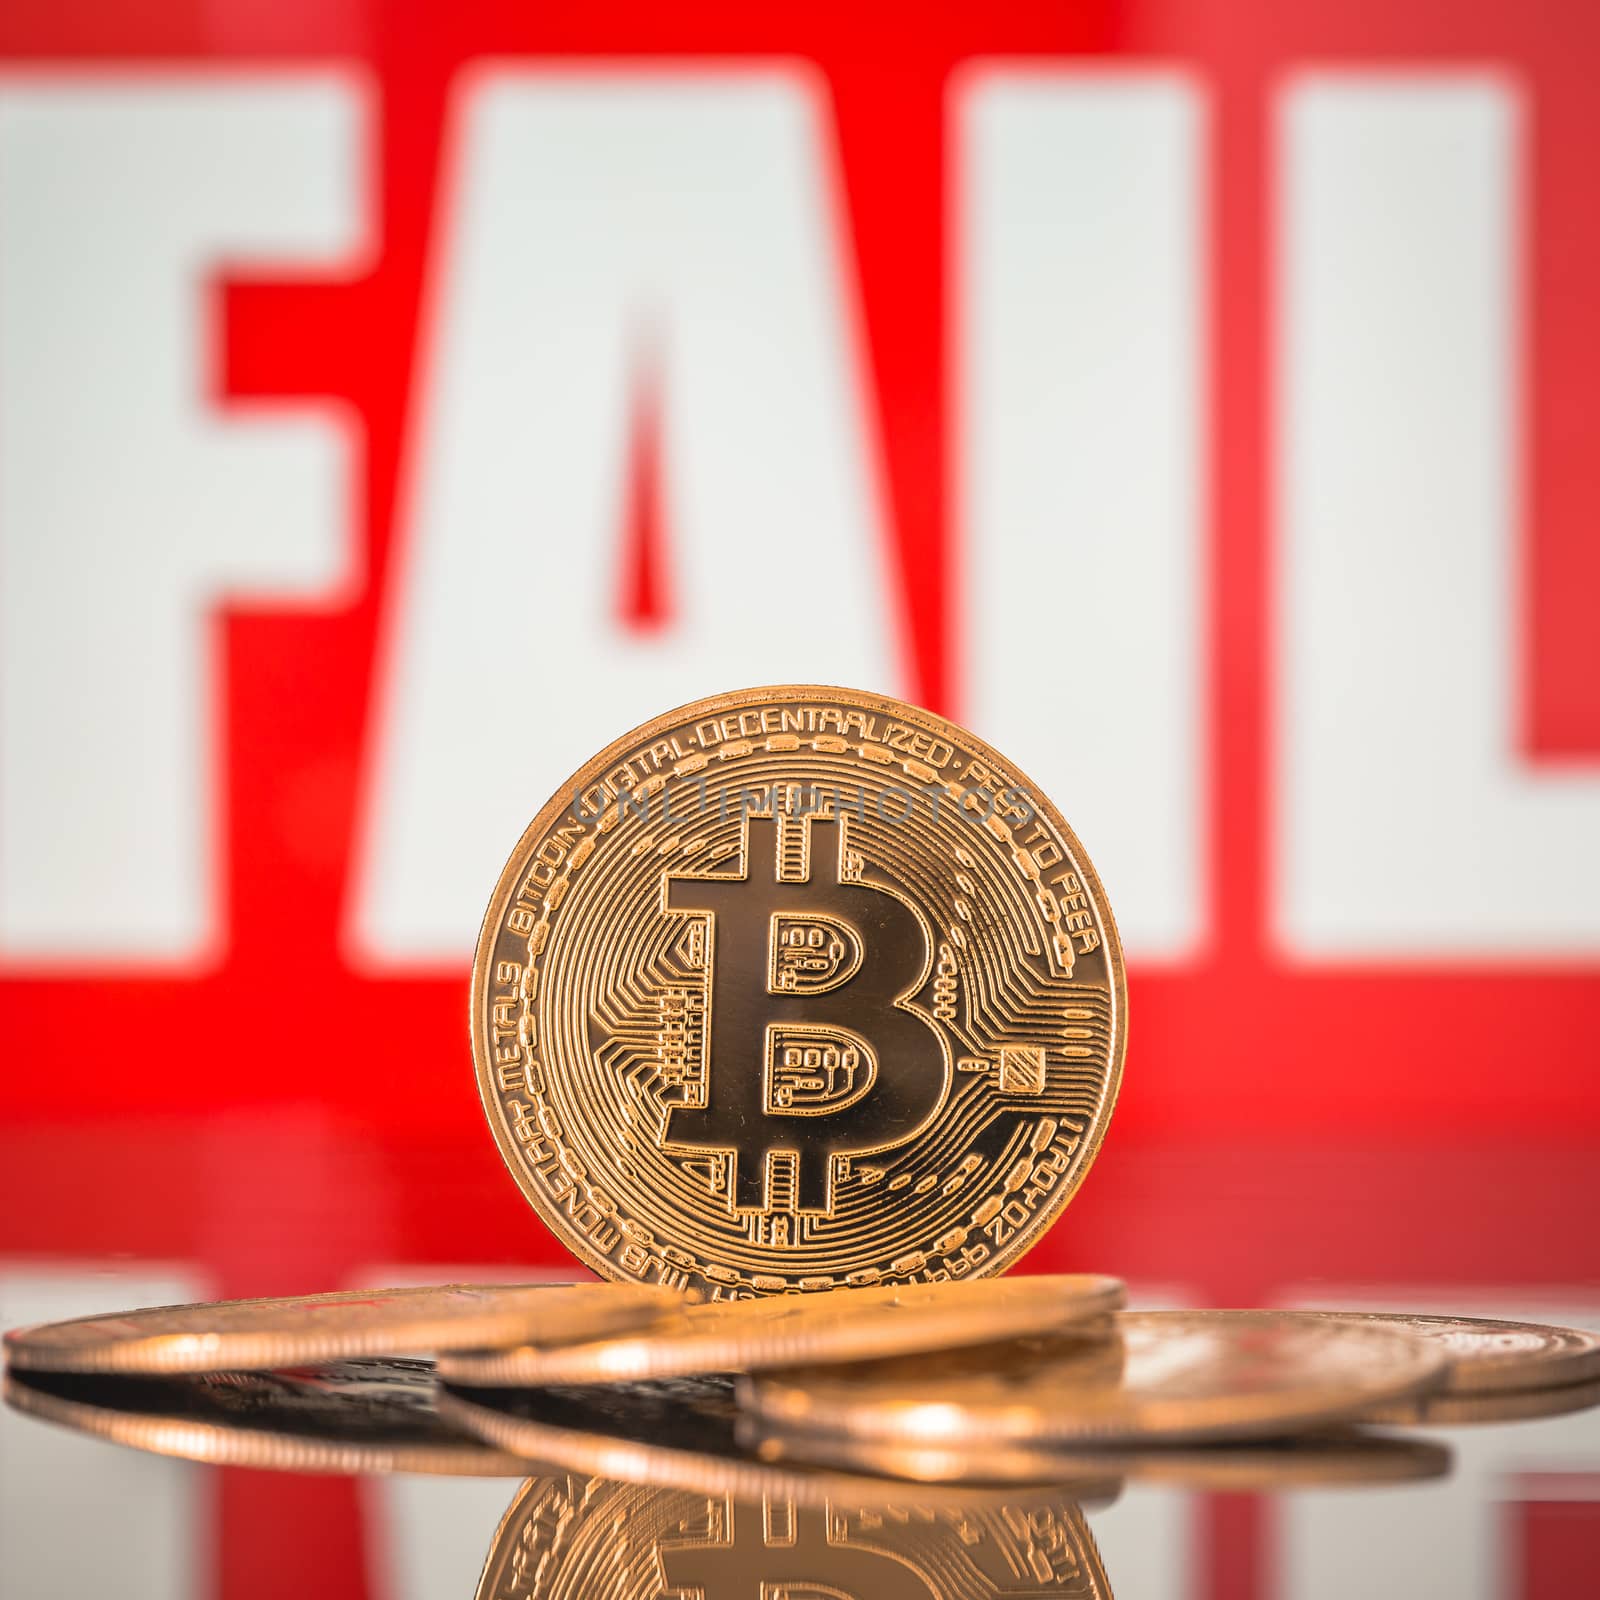 Bitcoin and FAIL lettering in the background.